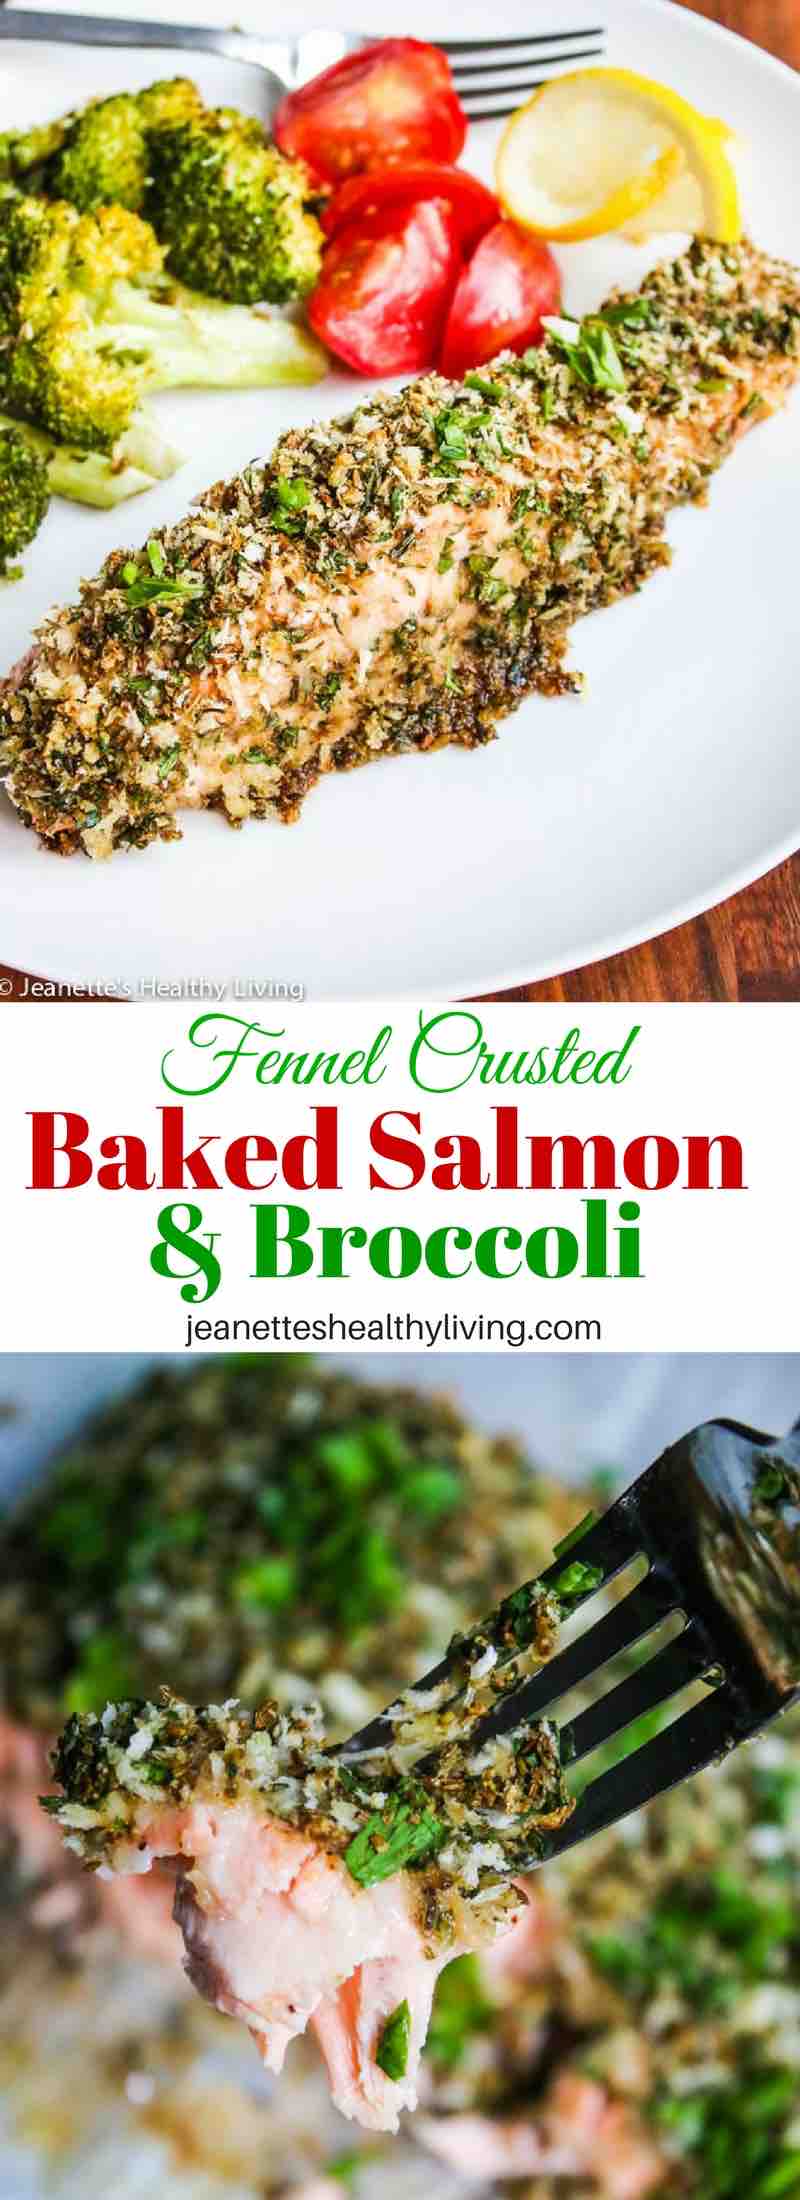 Fennel Crusted Baked Salmon and Broccoli - easy fast one pan dinner recipe